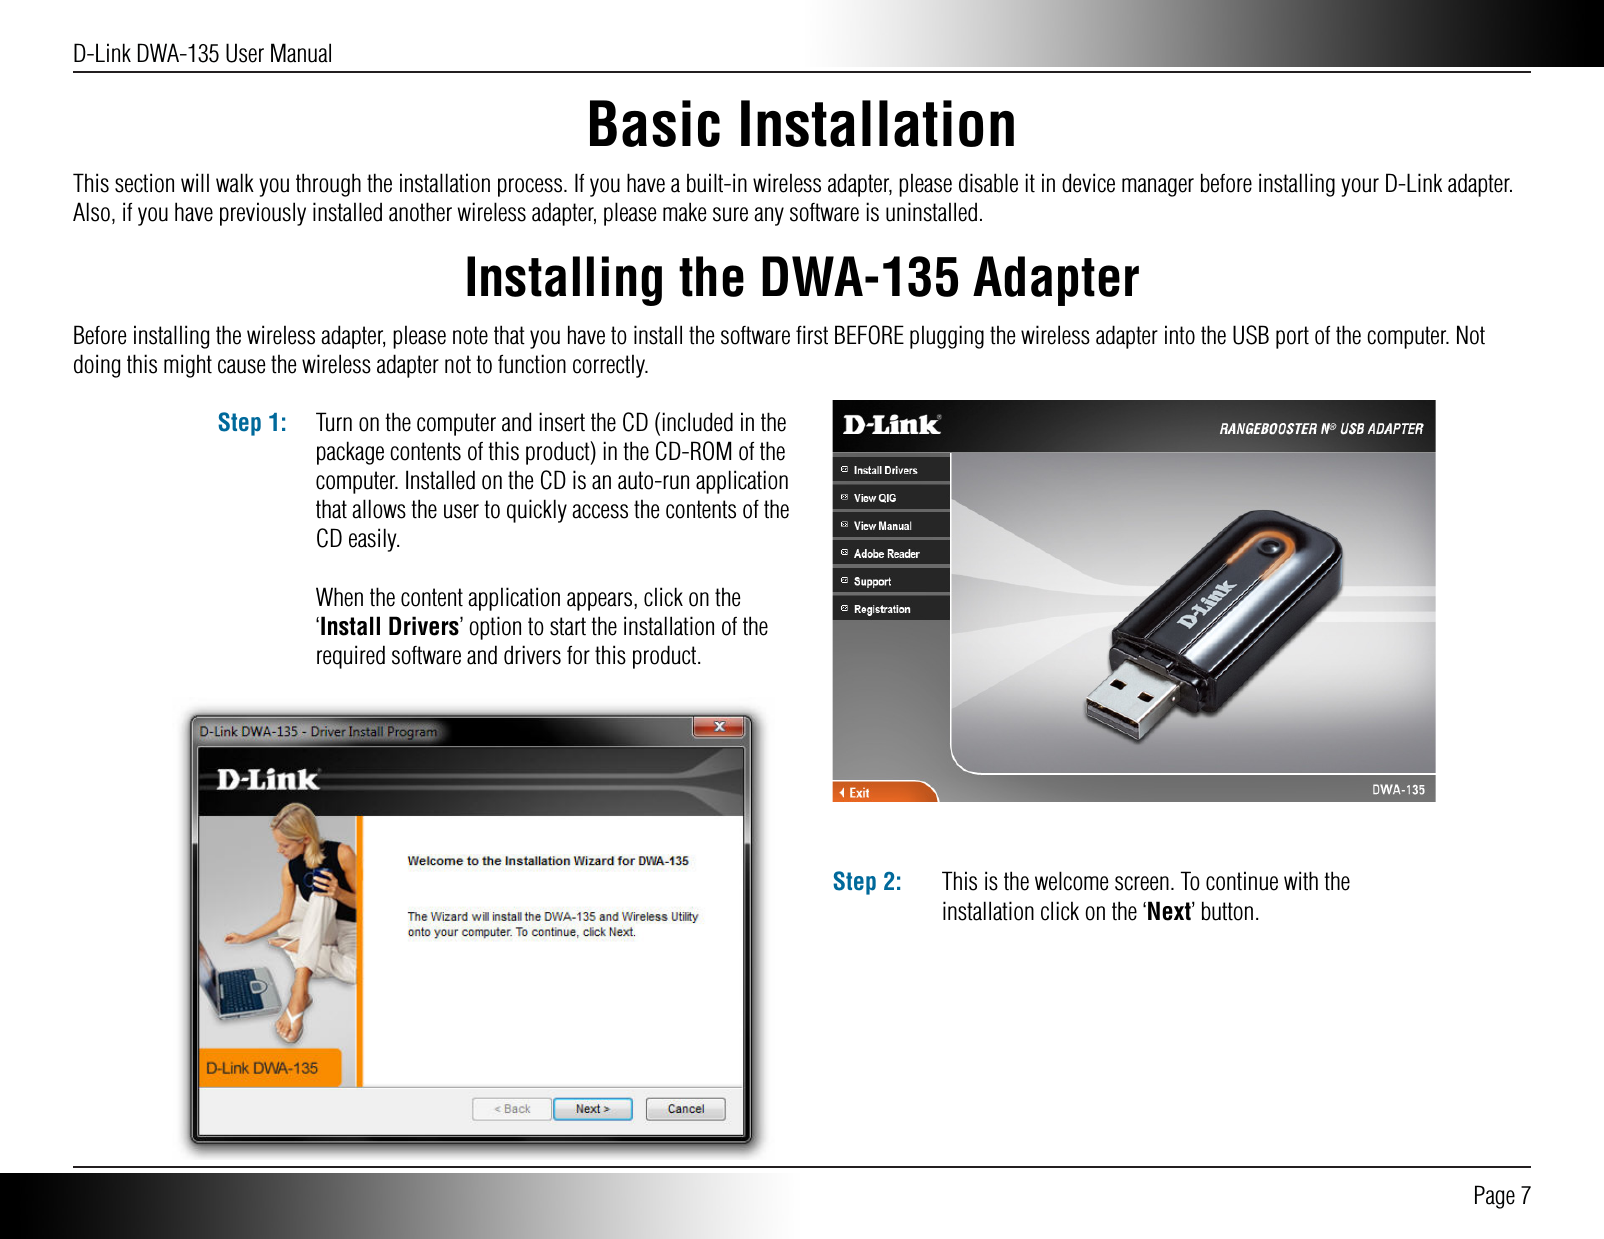 D-Link DWA-135 User Manual Page 7Basic InstallationInstalling the DWA-135 AdapterThis section will walk you through the installation process. If you have a built-in wireless adapter, please disable it in device manager before installing your D-Link adapter. Also, if you have previously installed another wireless adapter, please make sure any software is uninstalled.Before installing the wireless adapter, please note that you have to install the software ﬁrst BEFORE plugging the wireless adapter into the USB port of the computer. Not doing this might cause the wireless adapter not to function correctly. Turn on the computer and insert the CD (included in the package contents of this product) in the CD-ROM of the computer. Installed on the CD is an auto-run application that allows the user to quickly access the contents of the CD easily.When the content application appears, click on the ‘Install Drivers’ option to start the installation of the required software and drivers for this product.Step 1:This is the welcome screen. To continue with the installation click on the ‘Next’ button.Step 2: